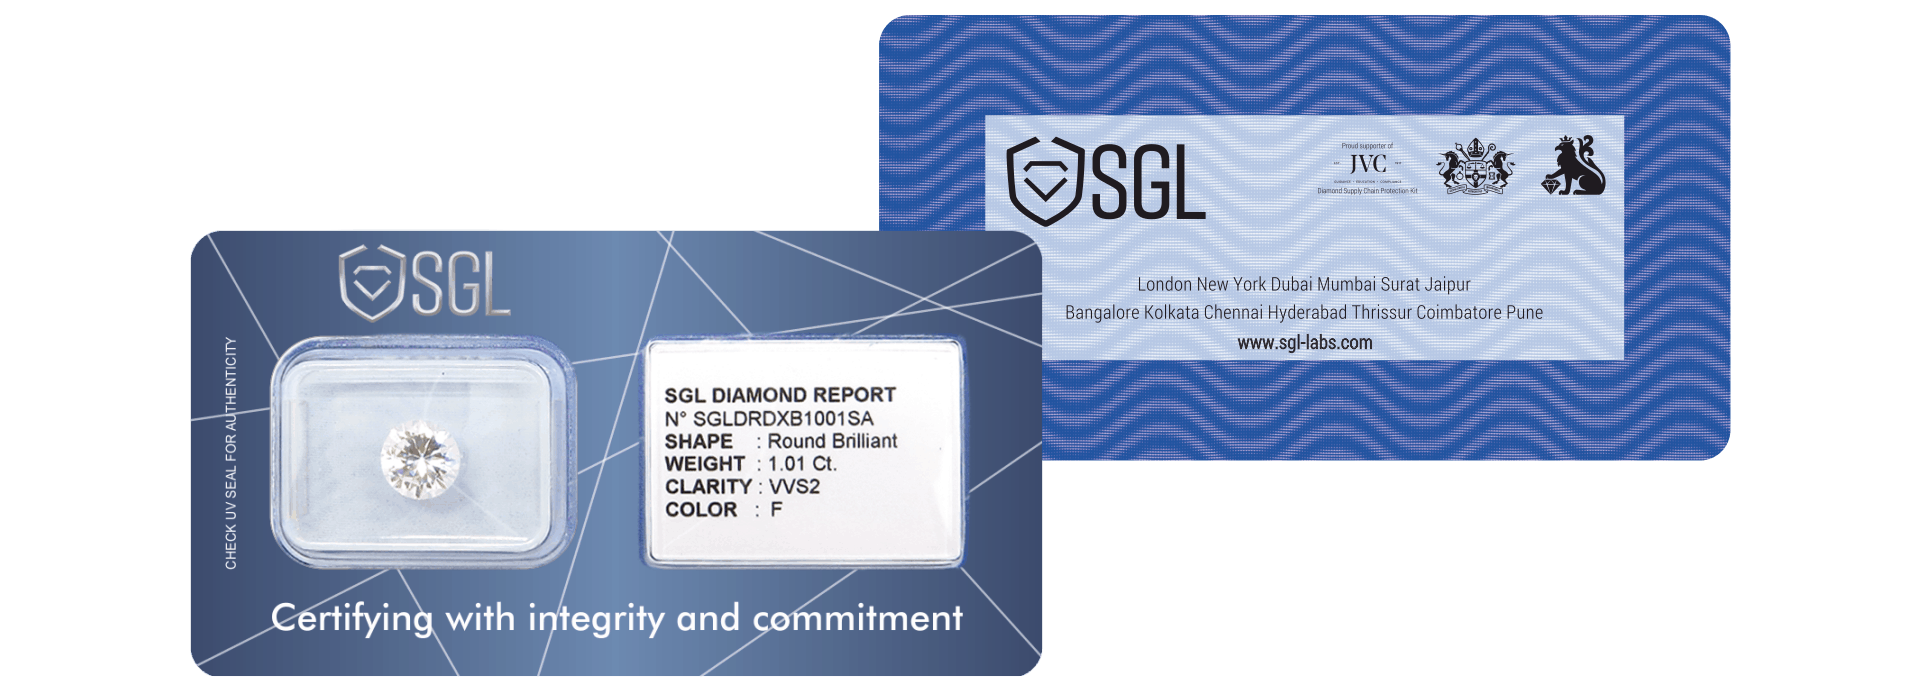 This is the image of SGL diamond report which displays shape, weight, clarity and colour of the diamond post its certification.